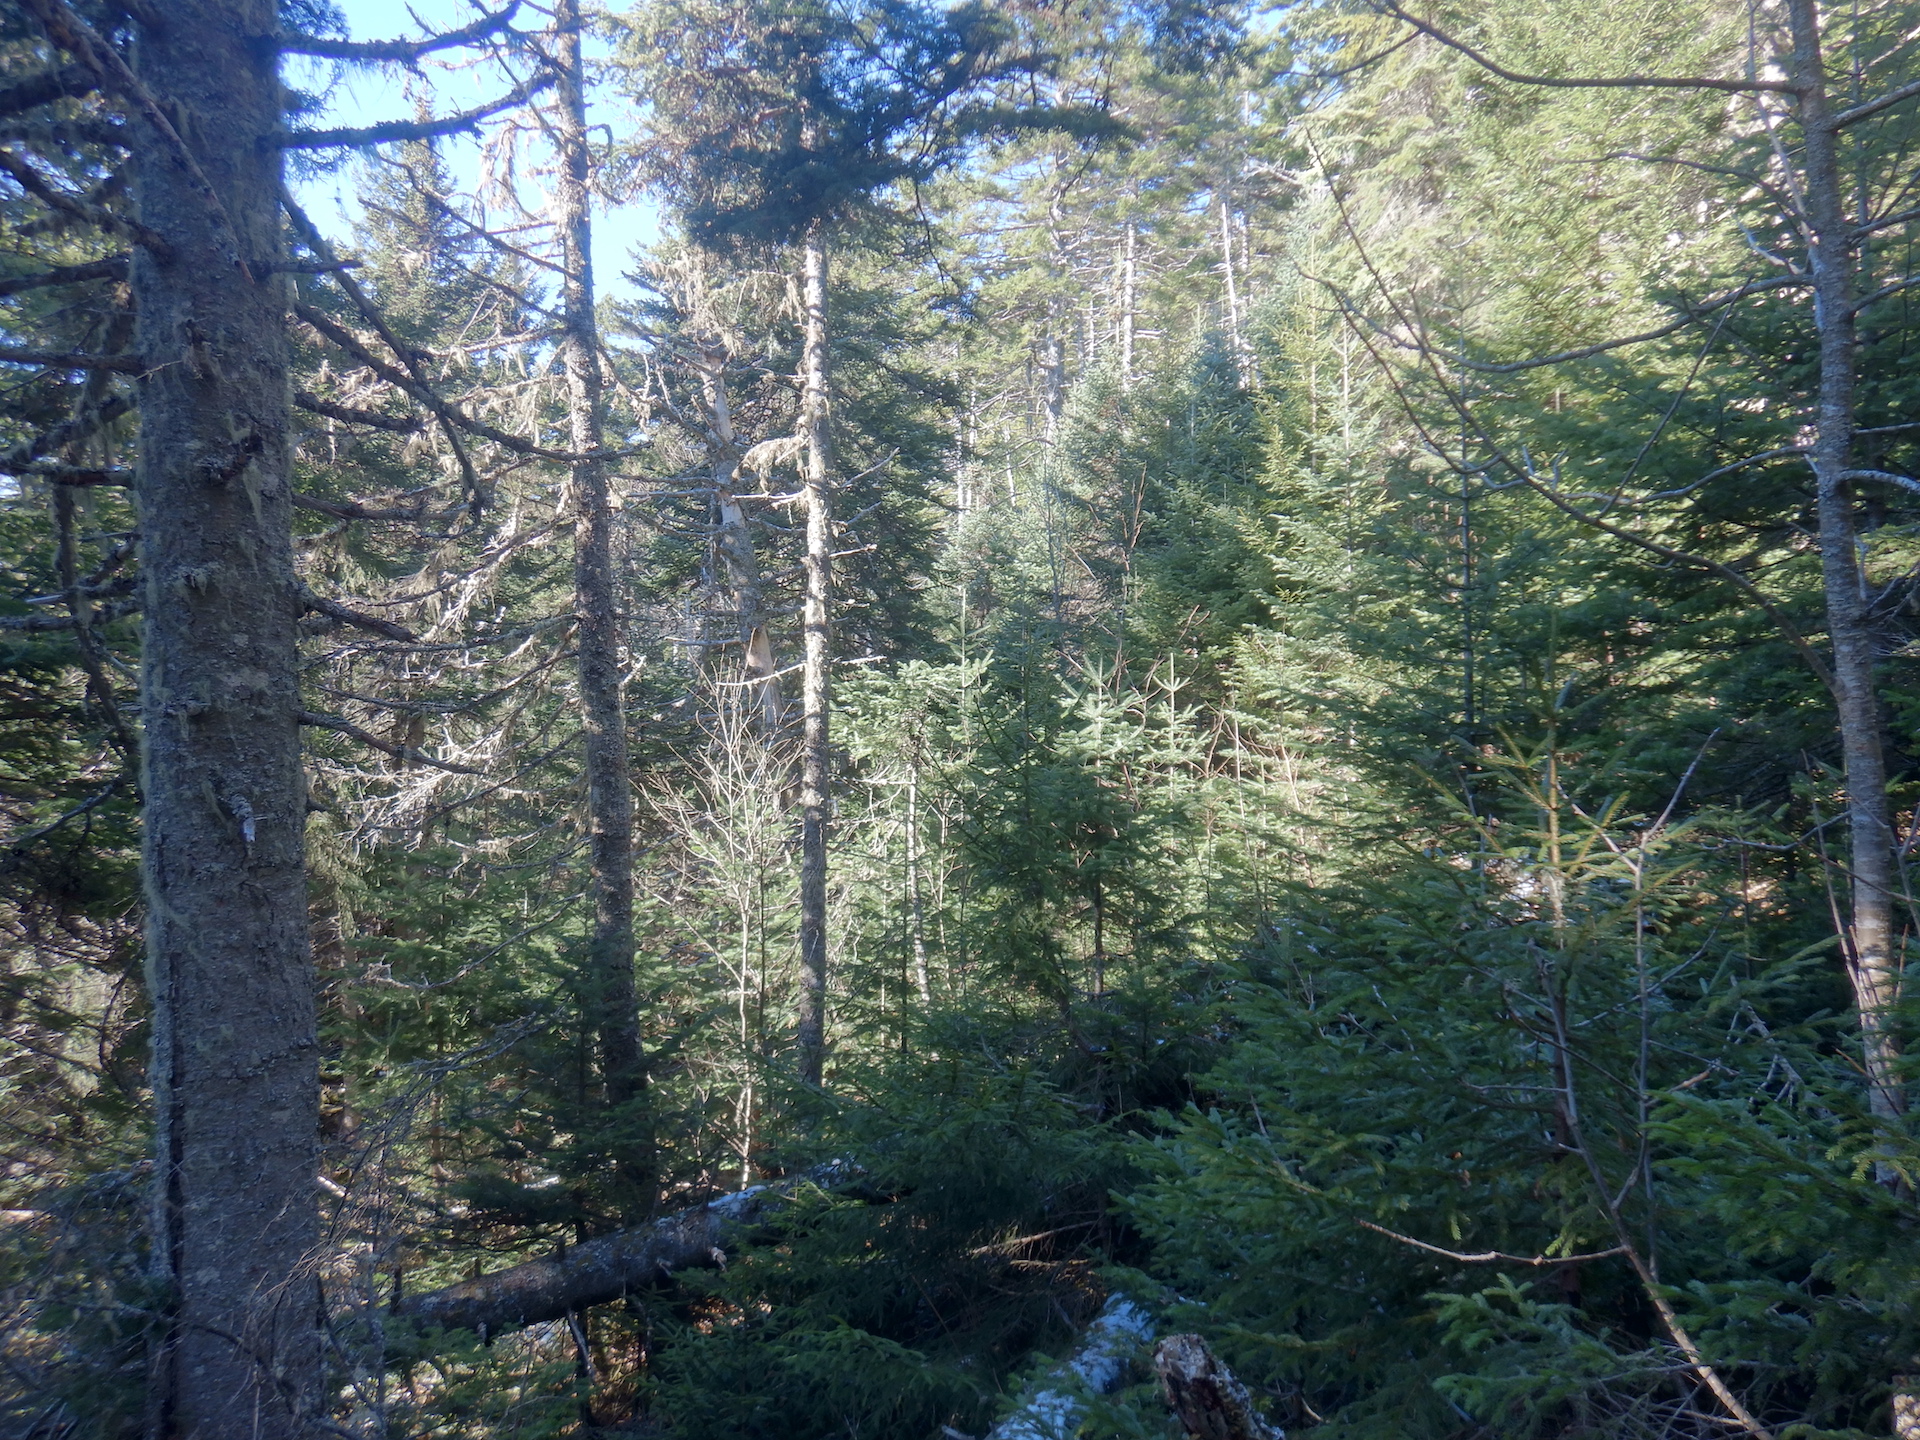 View of forest that is a mix of young and old spruce and fir trees. Dead standing trees are among them. A large trunk is at left. Tiny patches of snow sit on fallen tree trunks.